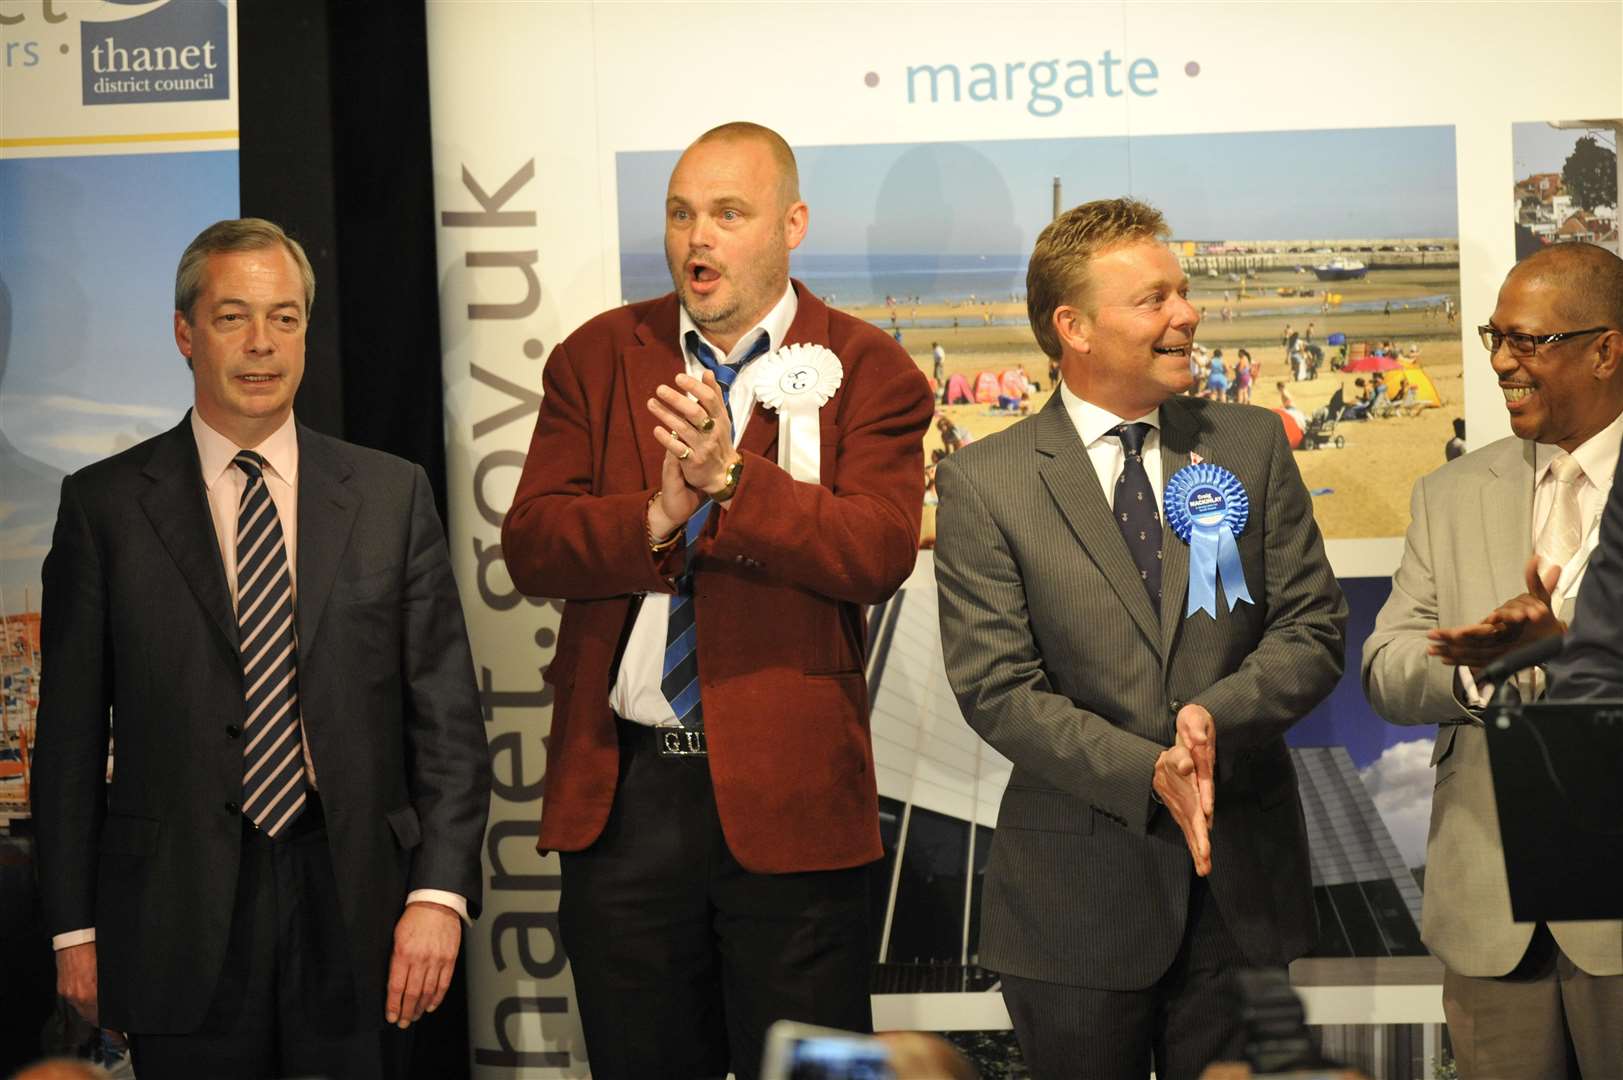 Craig Mackinlay after the result was announced in 2015 defeating Nigel Farage, left, and comedian Al Murray